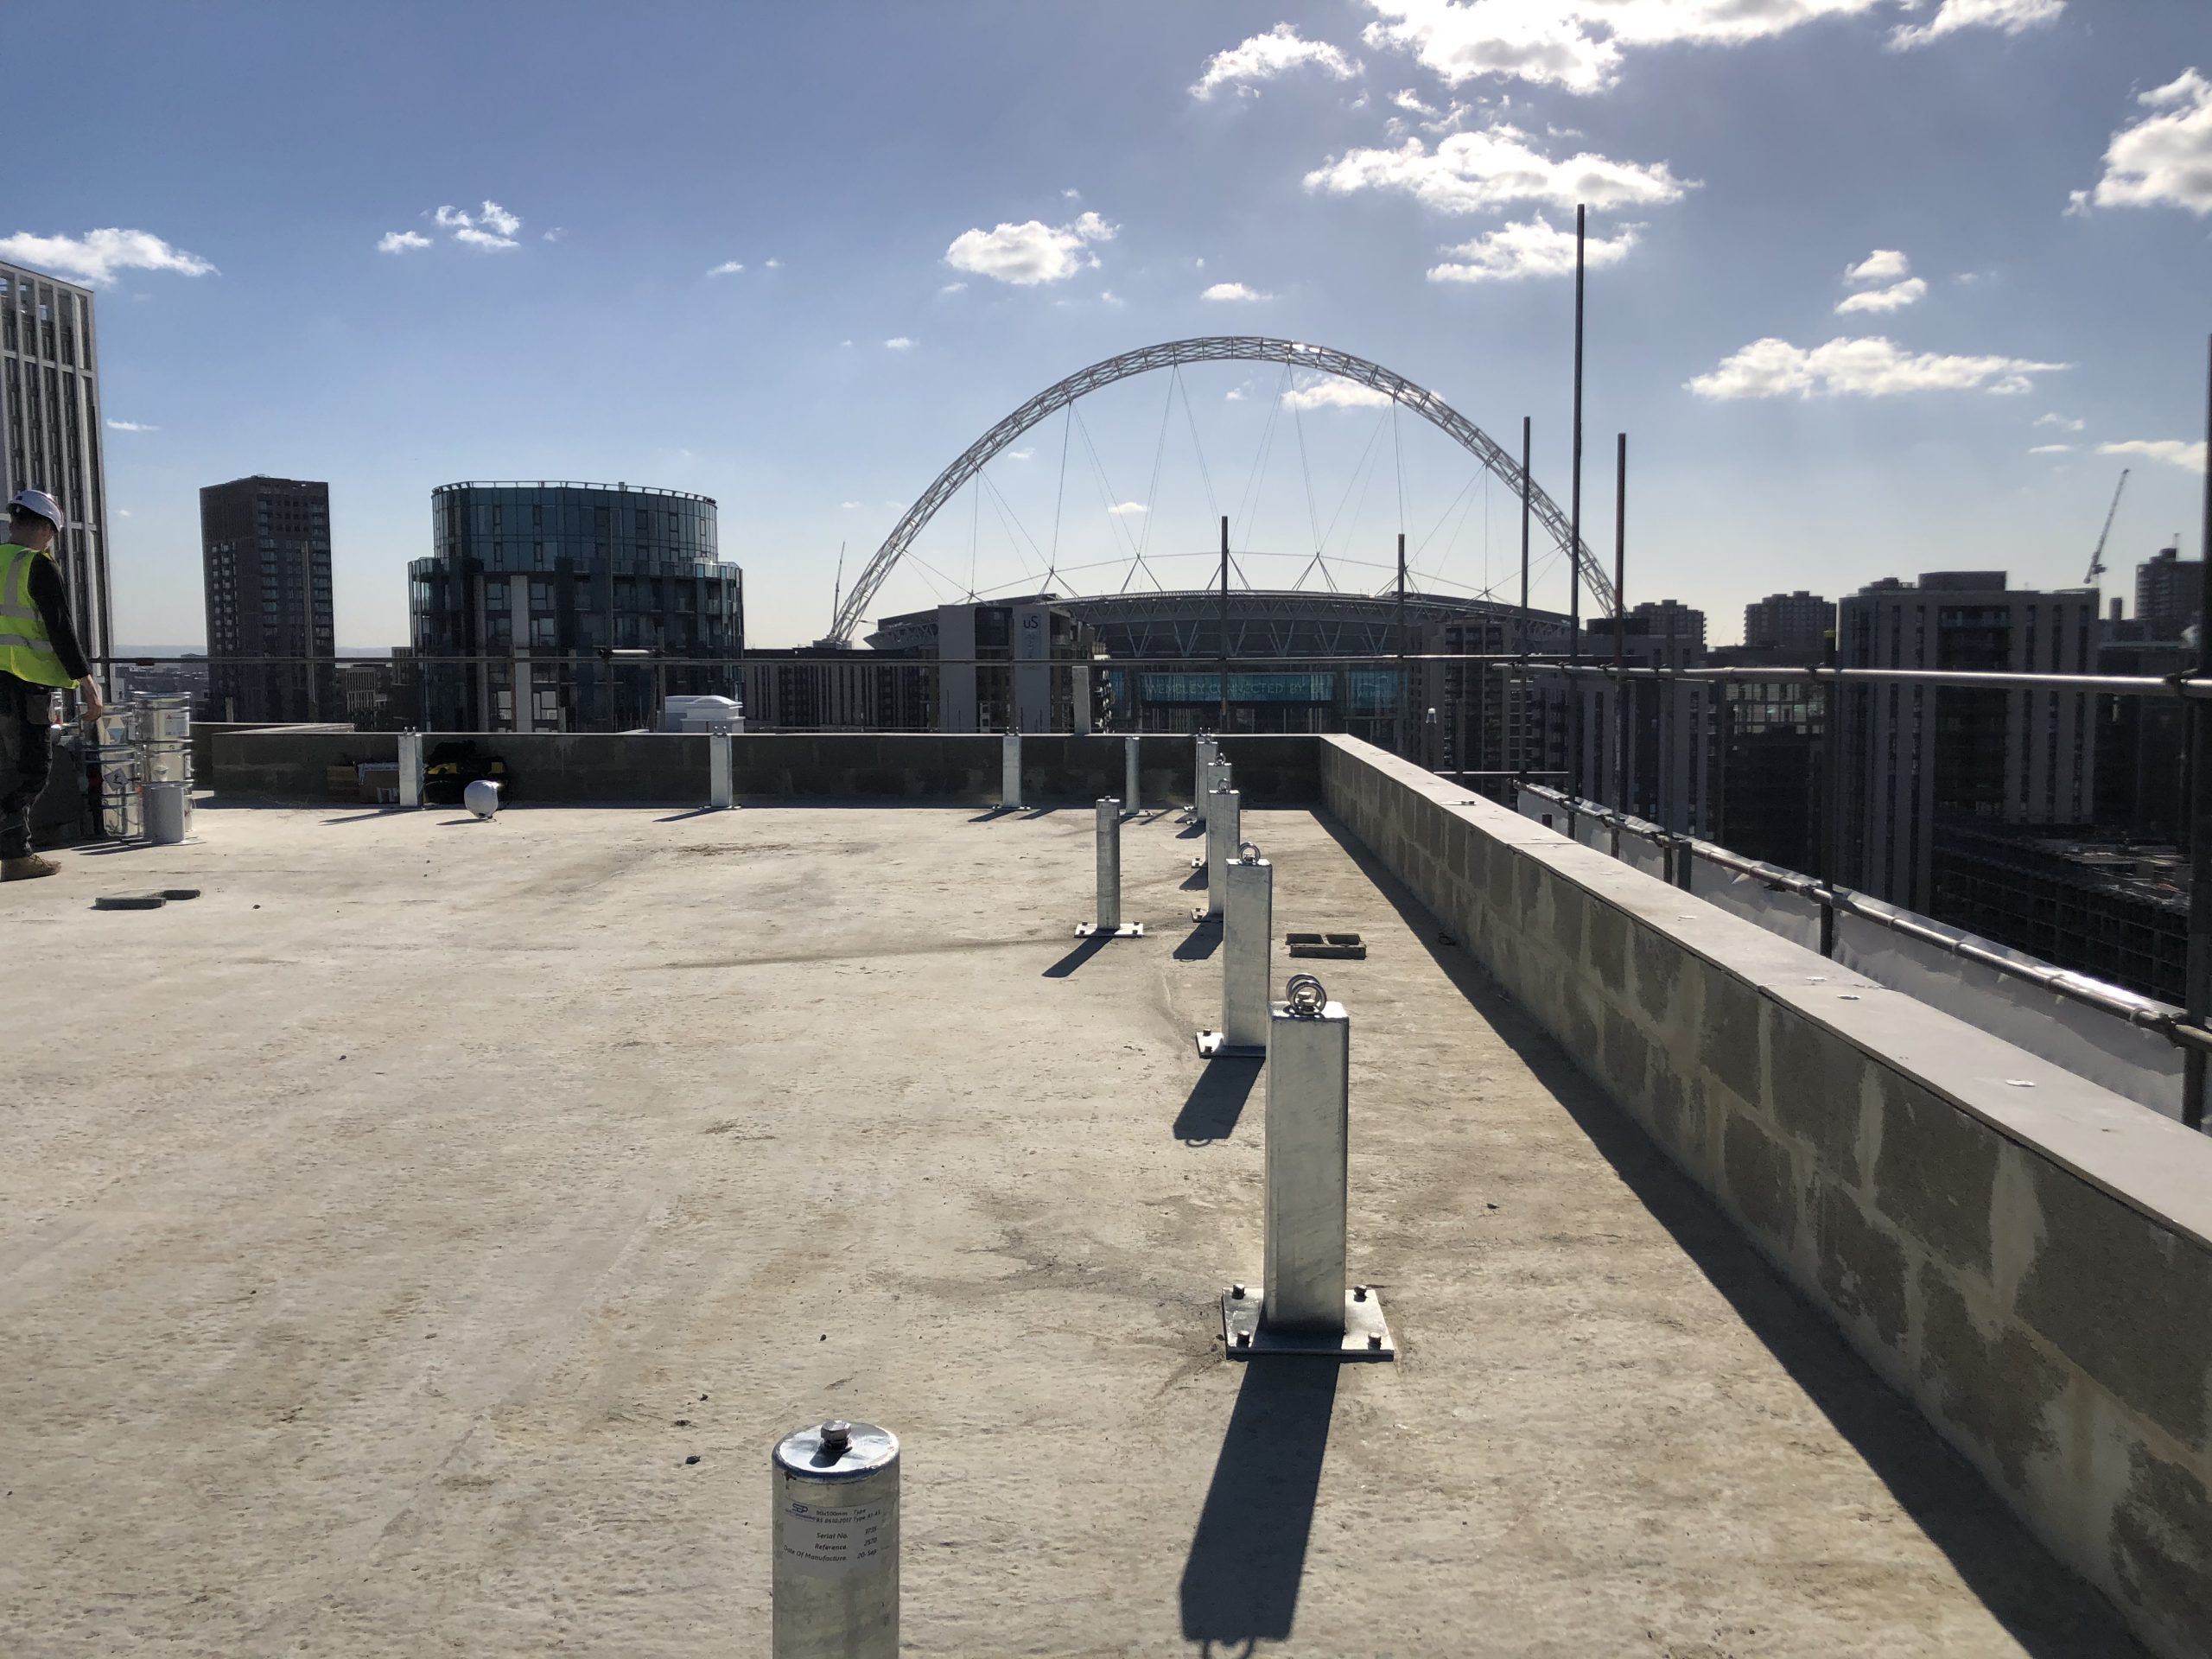 Heightsafe twin anchor points abseil anchor posts bieng installed at Olympic way london